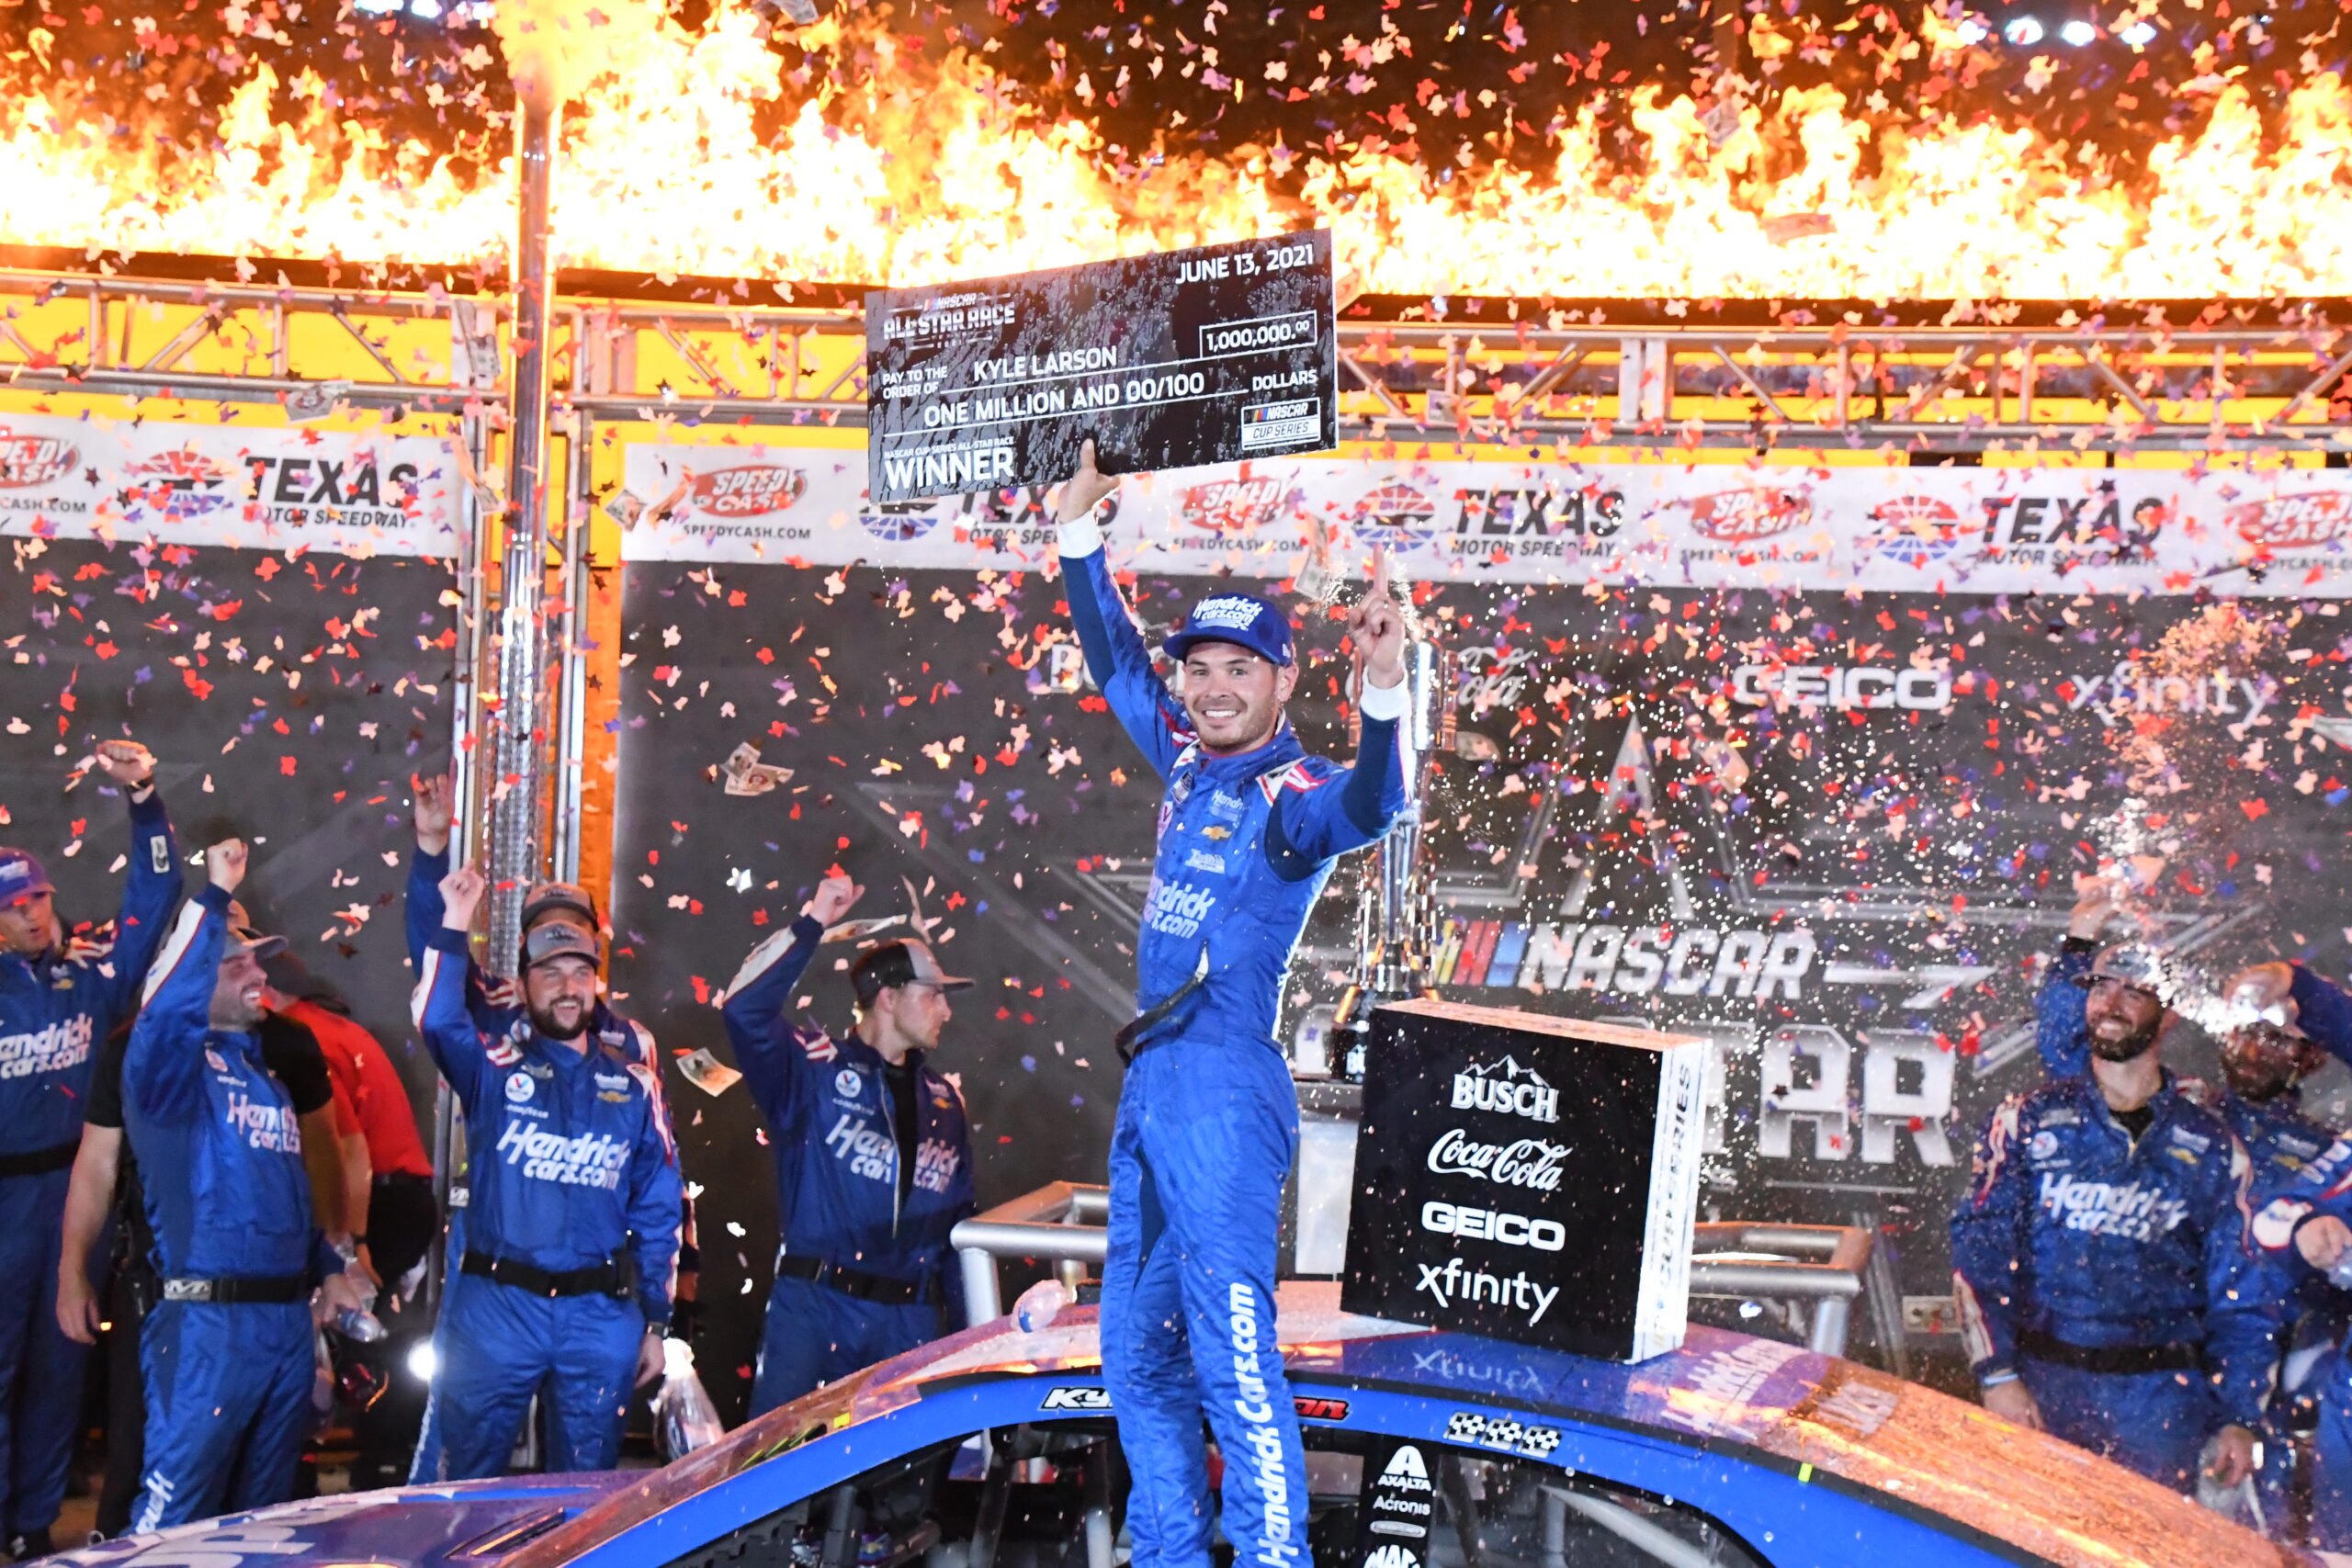 Surely, Kyle Larson keeps focused in the midst of his incredible season. (Photo: Sean Folsom/The Podium Finish)